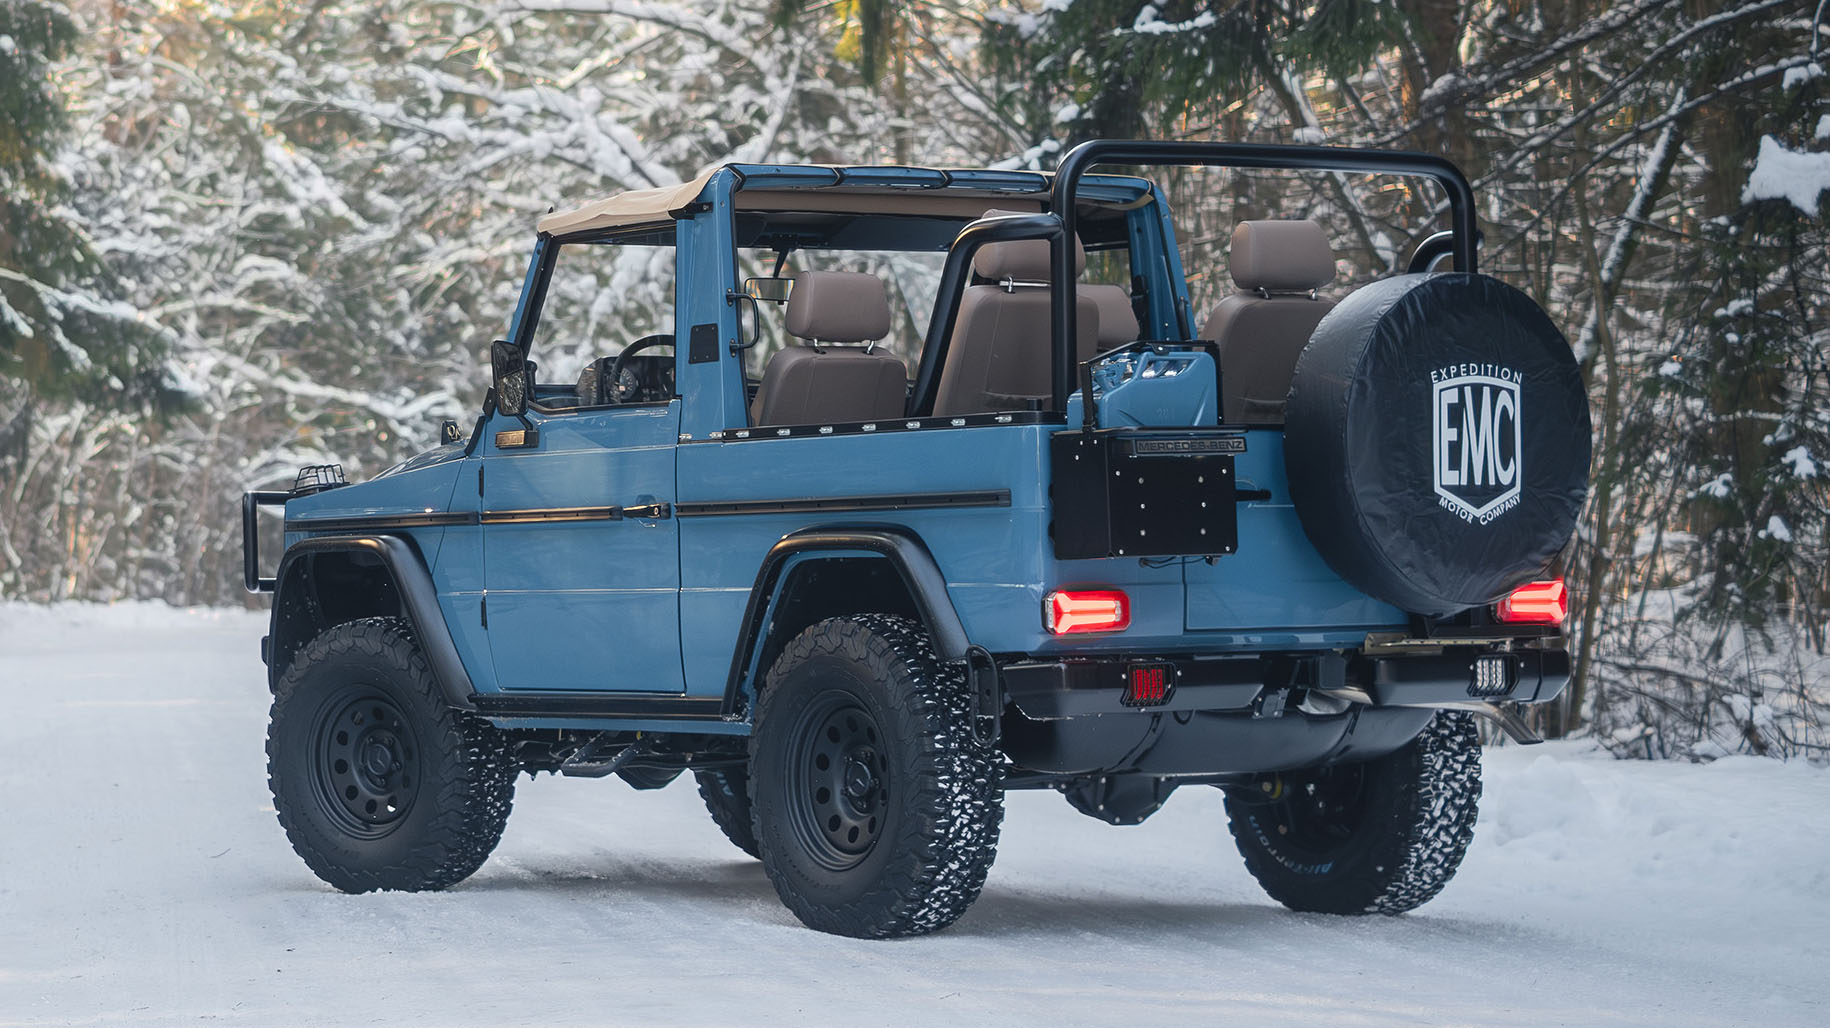 don’t fancy a new g-wagen? the emc 250gd wolf could be your calling